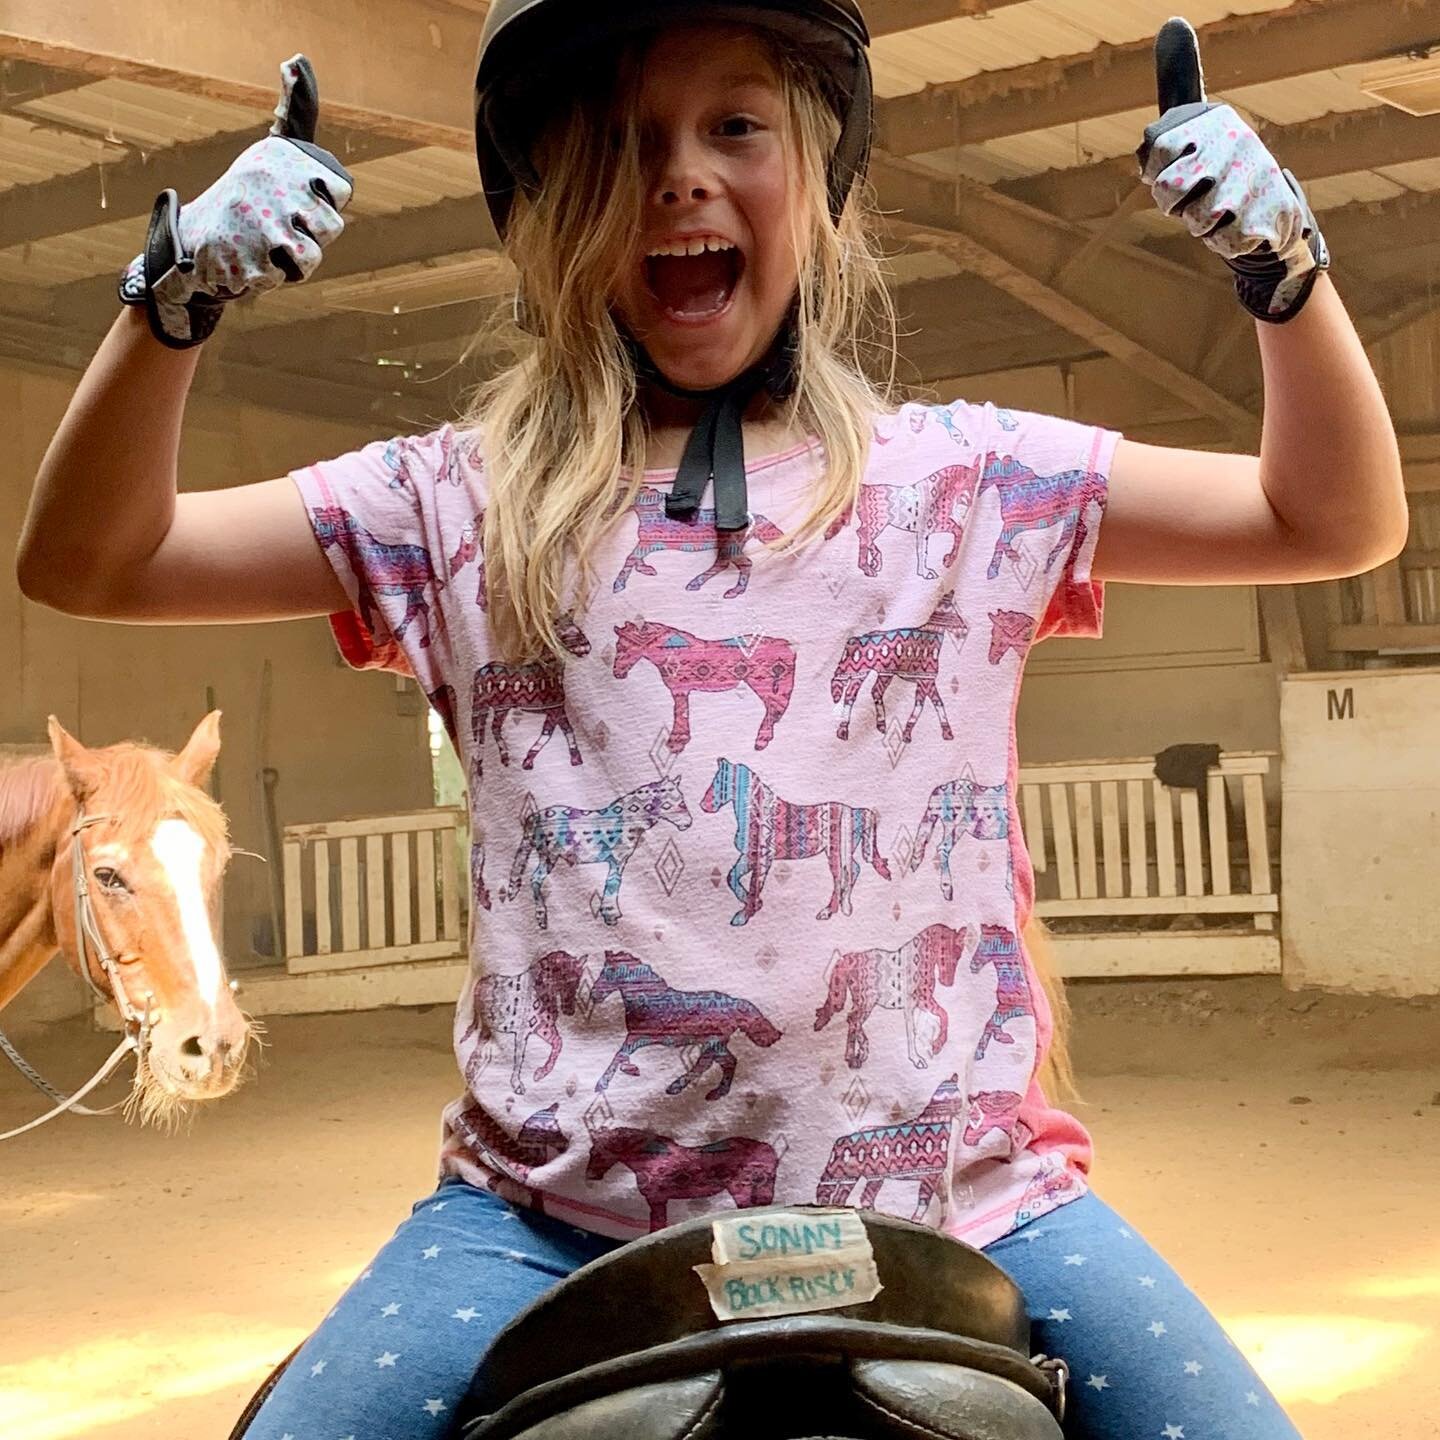 Havin&rsquo; a blast at Horsemanship Camp!  Of yeah...we ride facing front too 🤪🐴❤️🤠